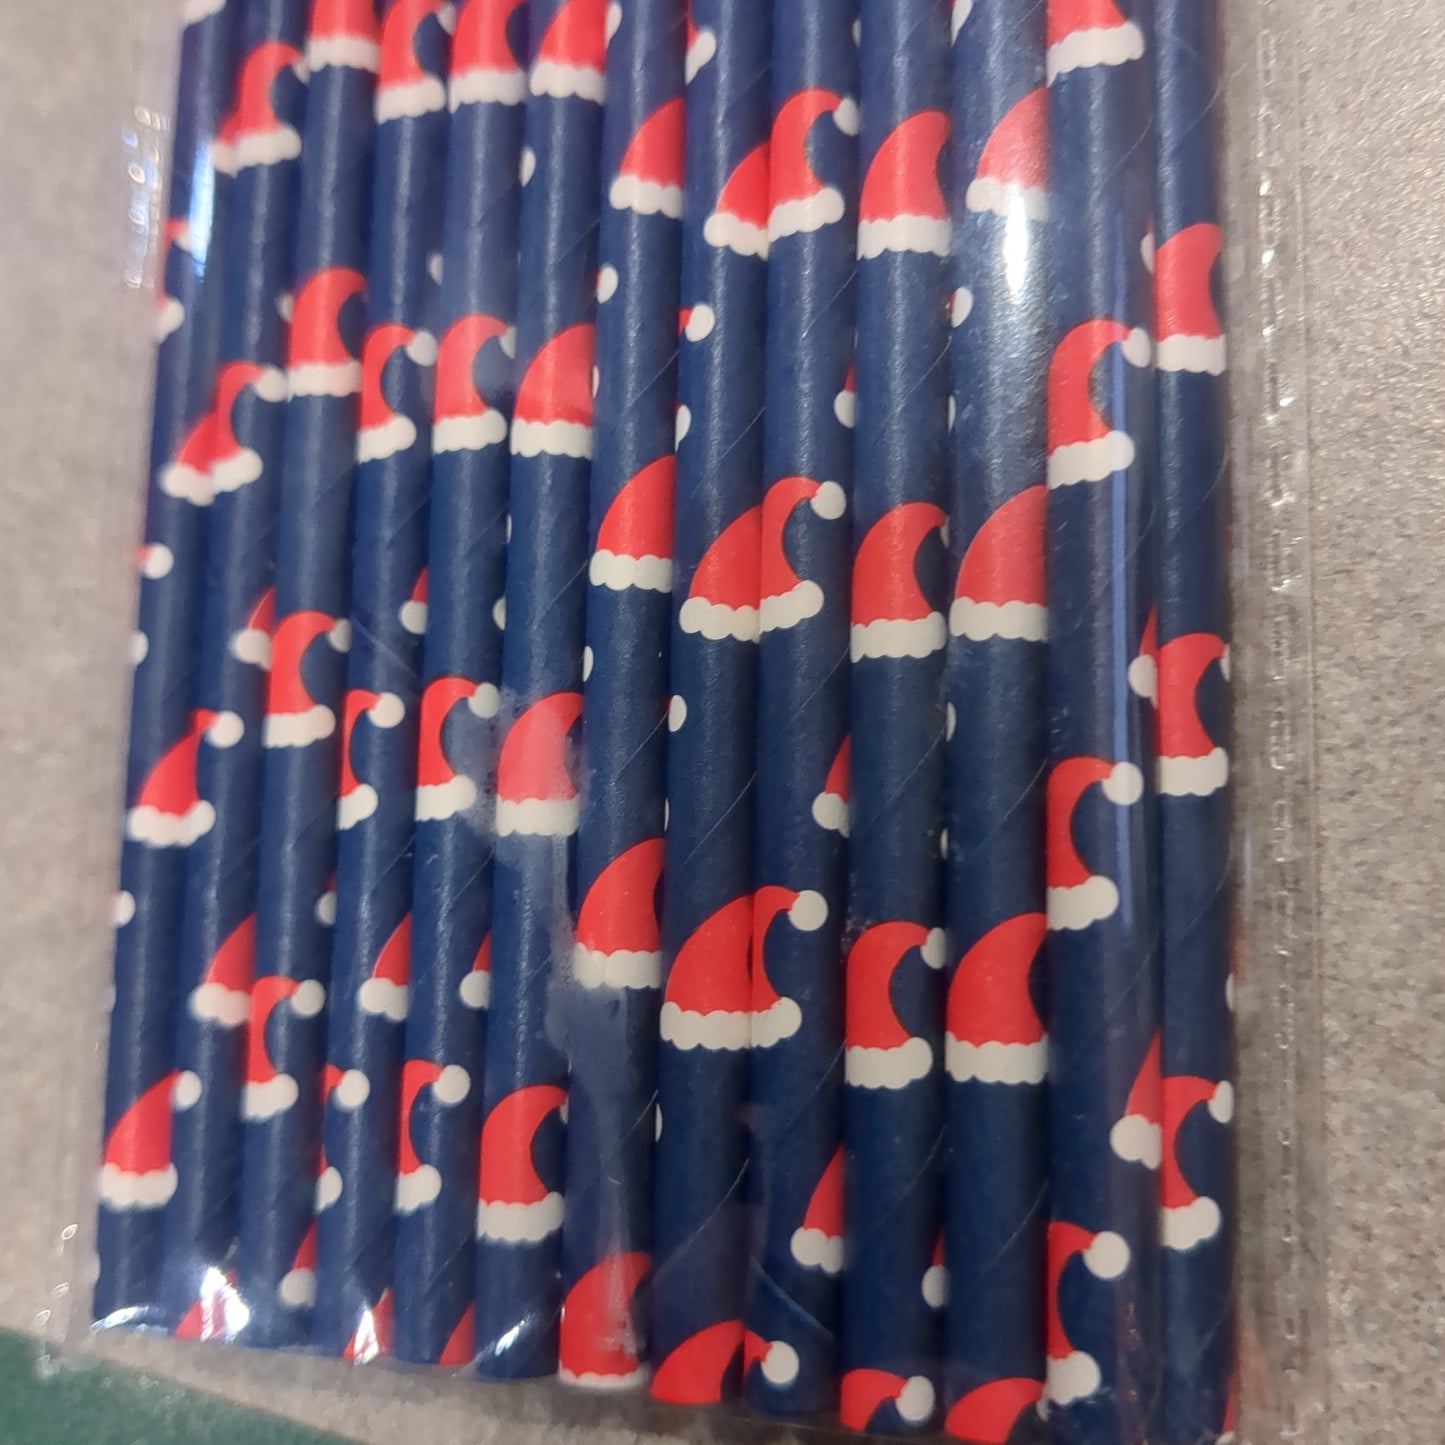 25 navy blue paper drinking straws with Santa hats